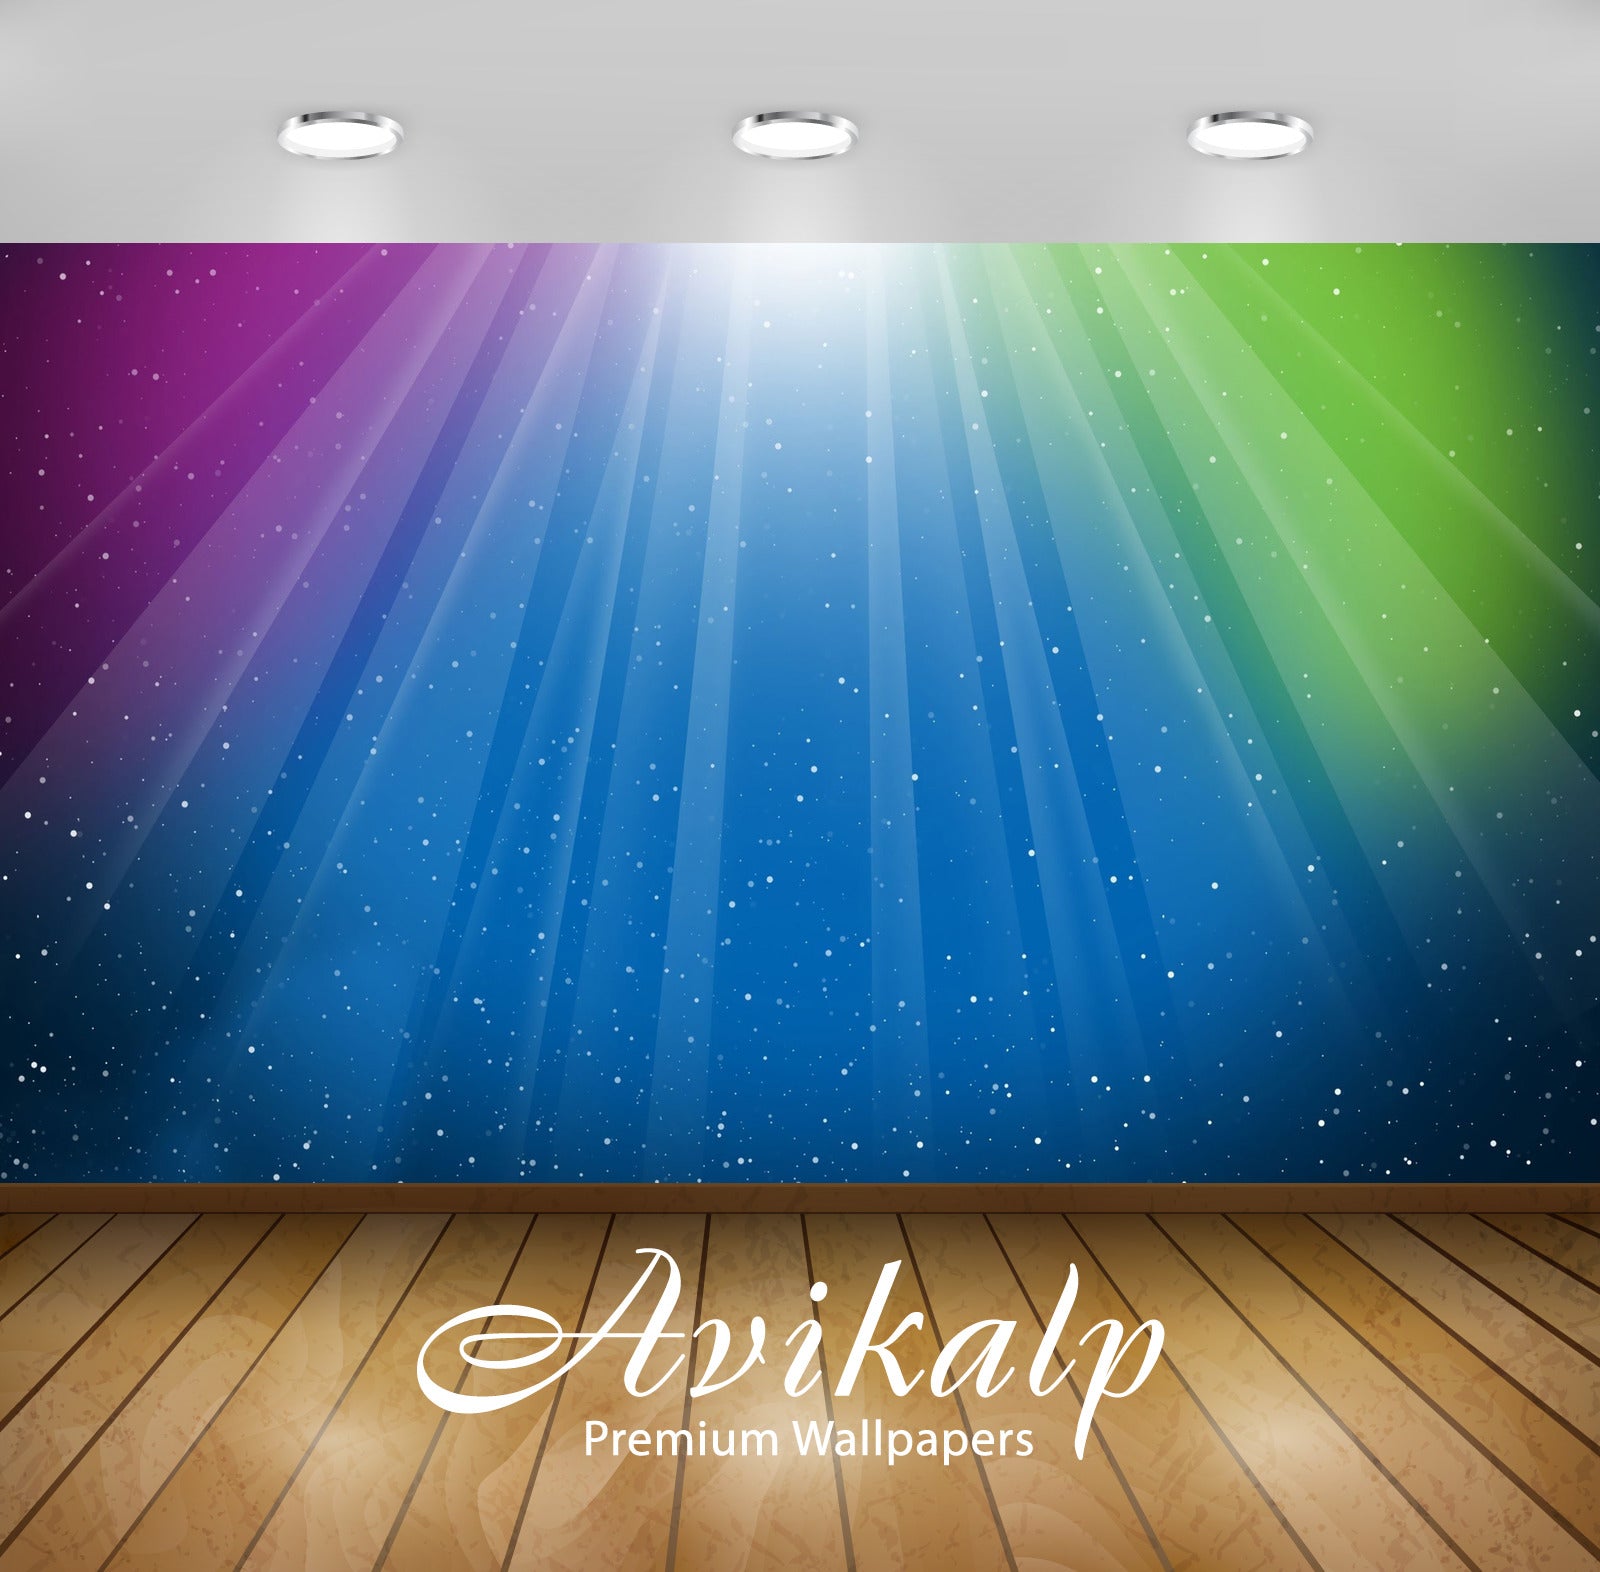 Avikalp Exclusive Awi4153 Colorful Flare Full HD Wallpapers for Living room, Hall, Kids Room, Kitche